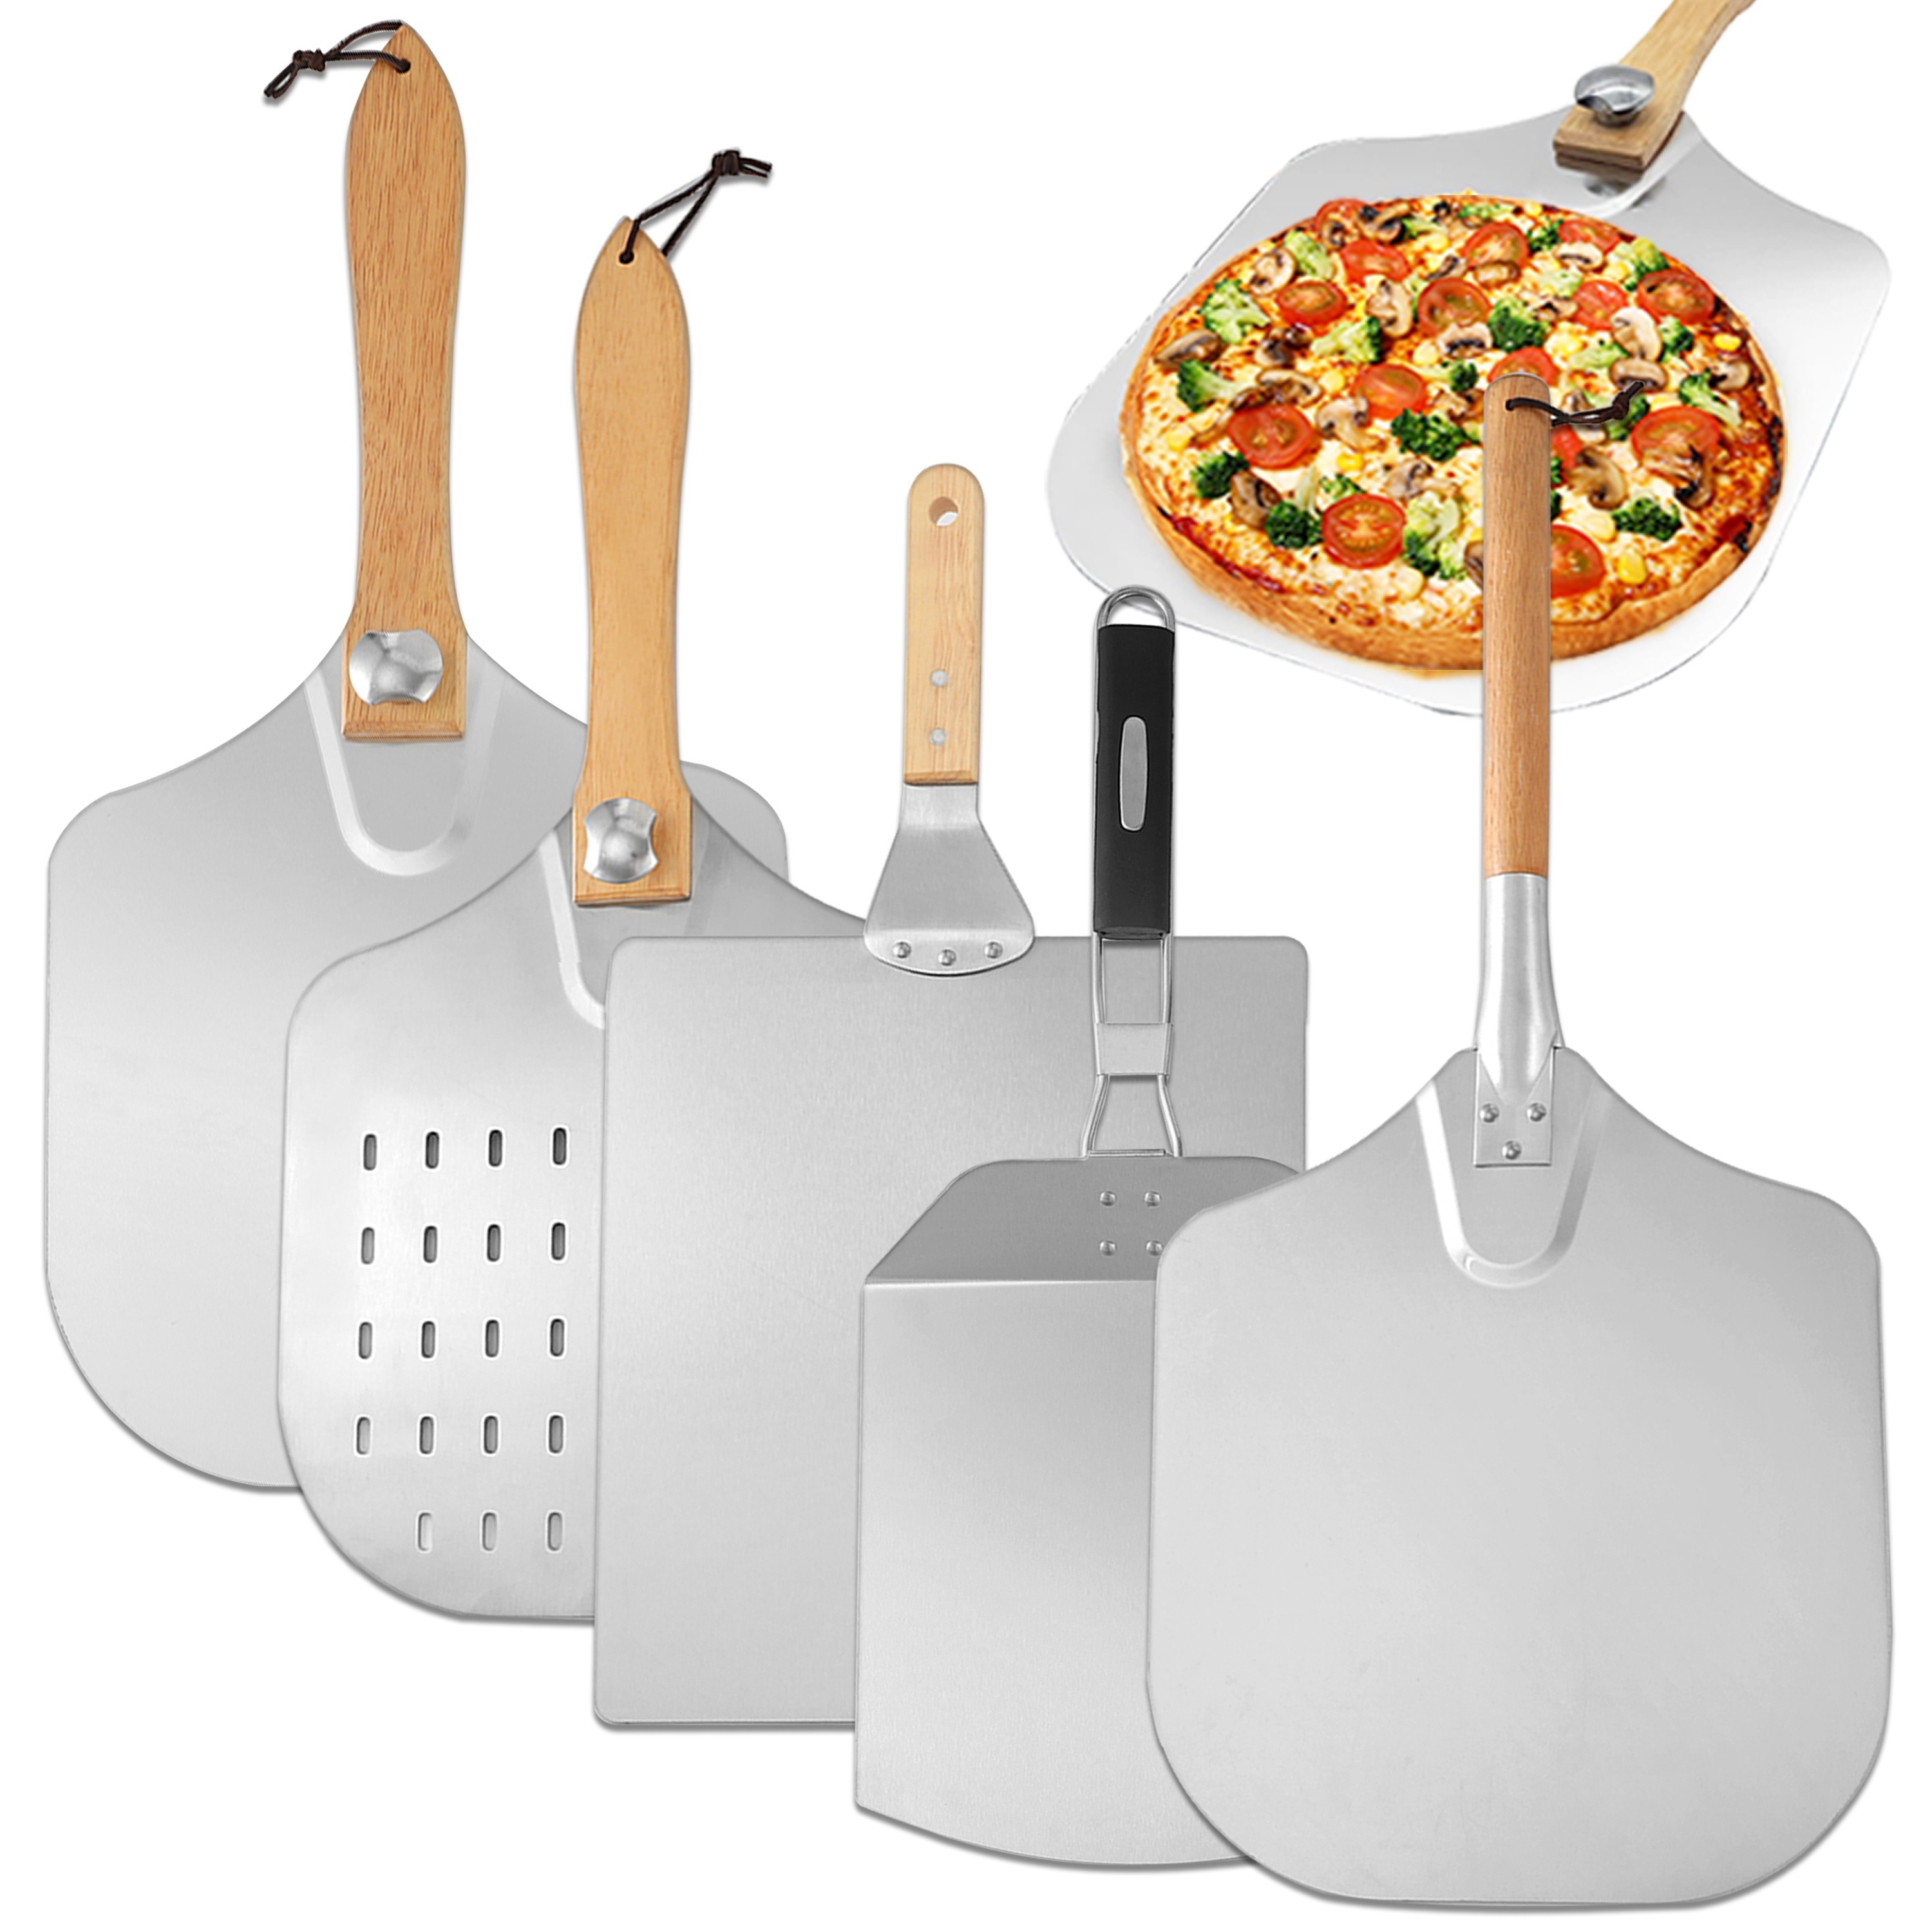  Sliding Pizza Peel,Pala Pizza Scorrevole,Pala per Pizza  Scorrevole,Pizza Slider Tool,Pizza Spatula Paddle for Indoor & Outdoor  Ovens (45 * 20): Home & Kitchen